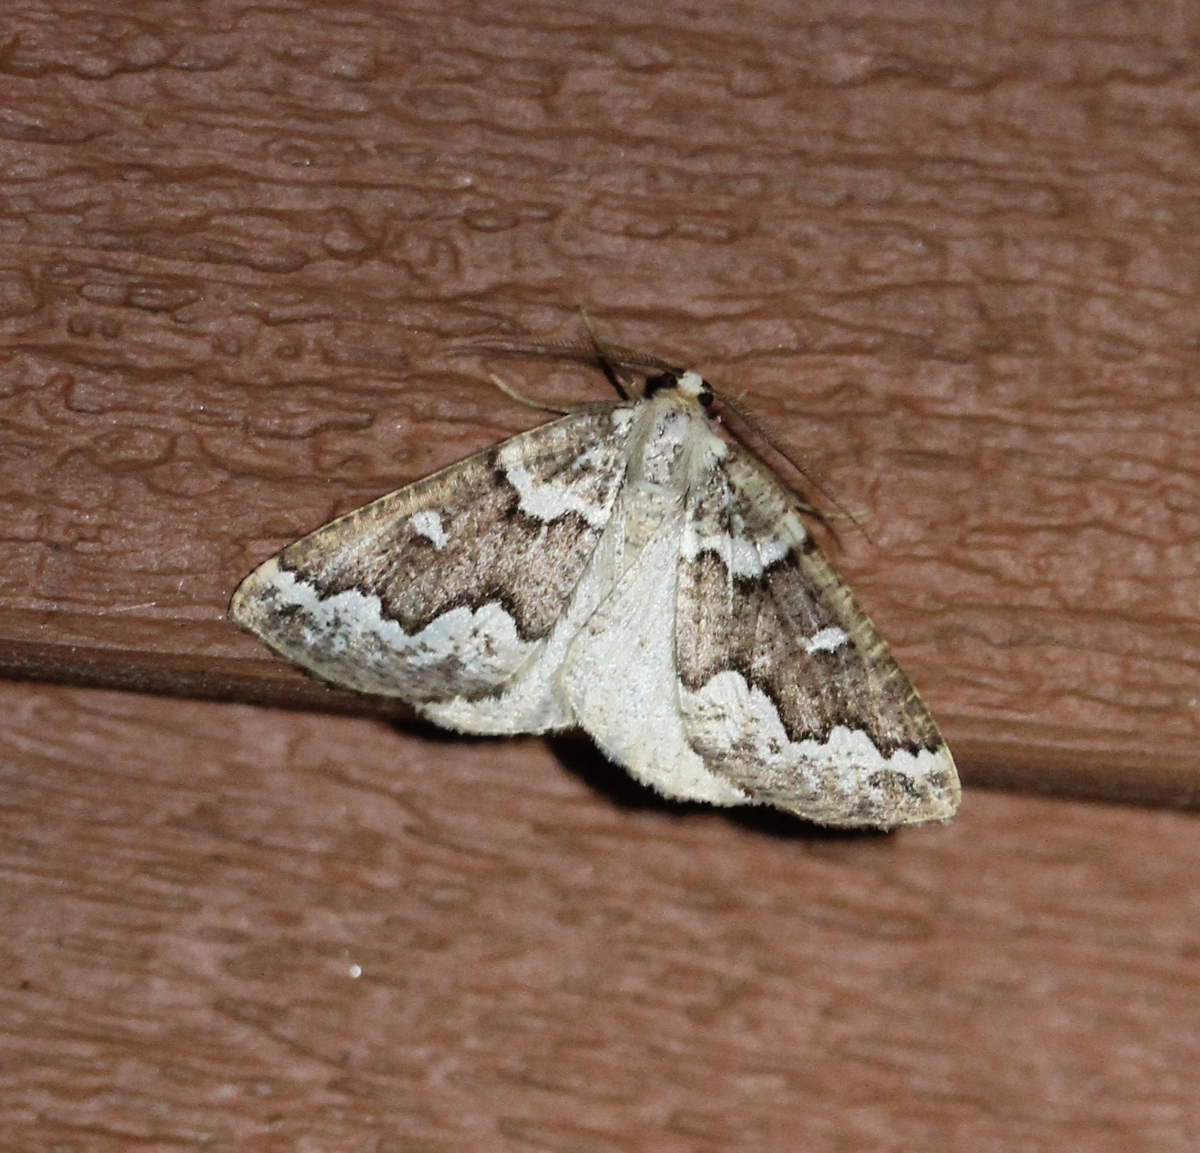 brown/white patterned moth on paintwork